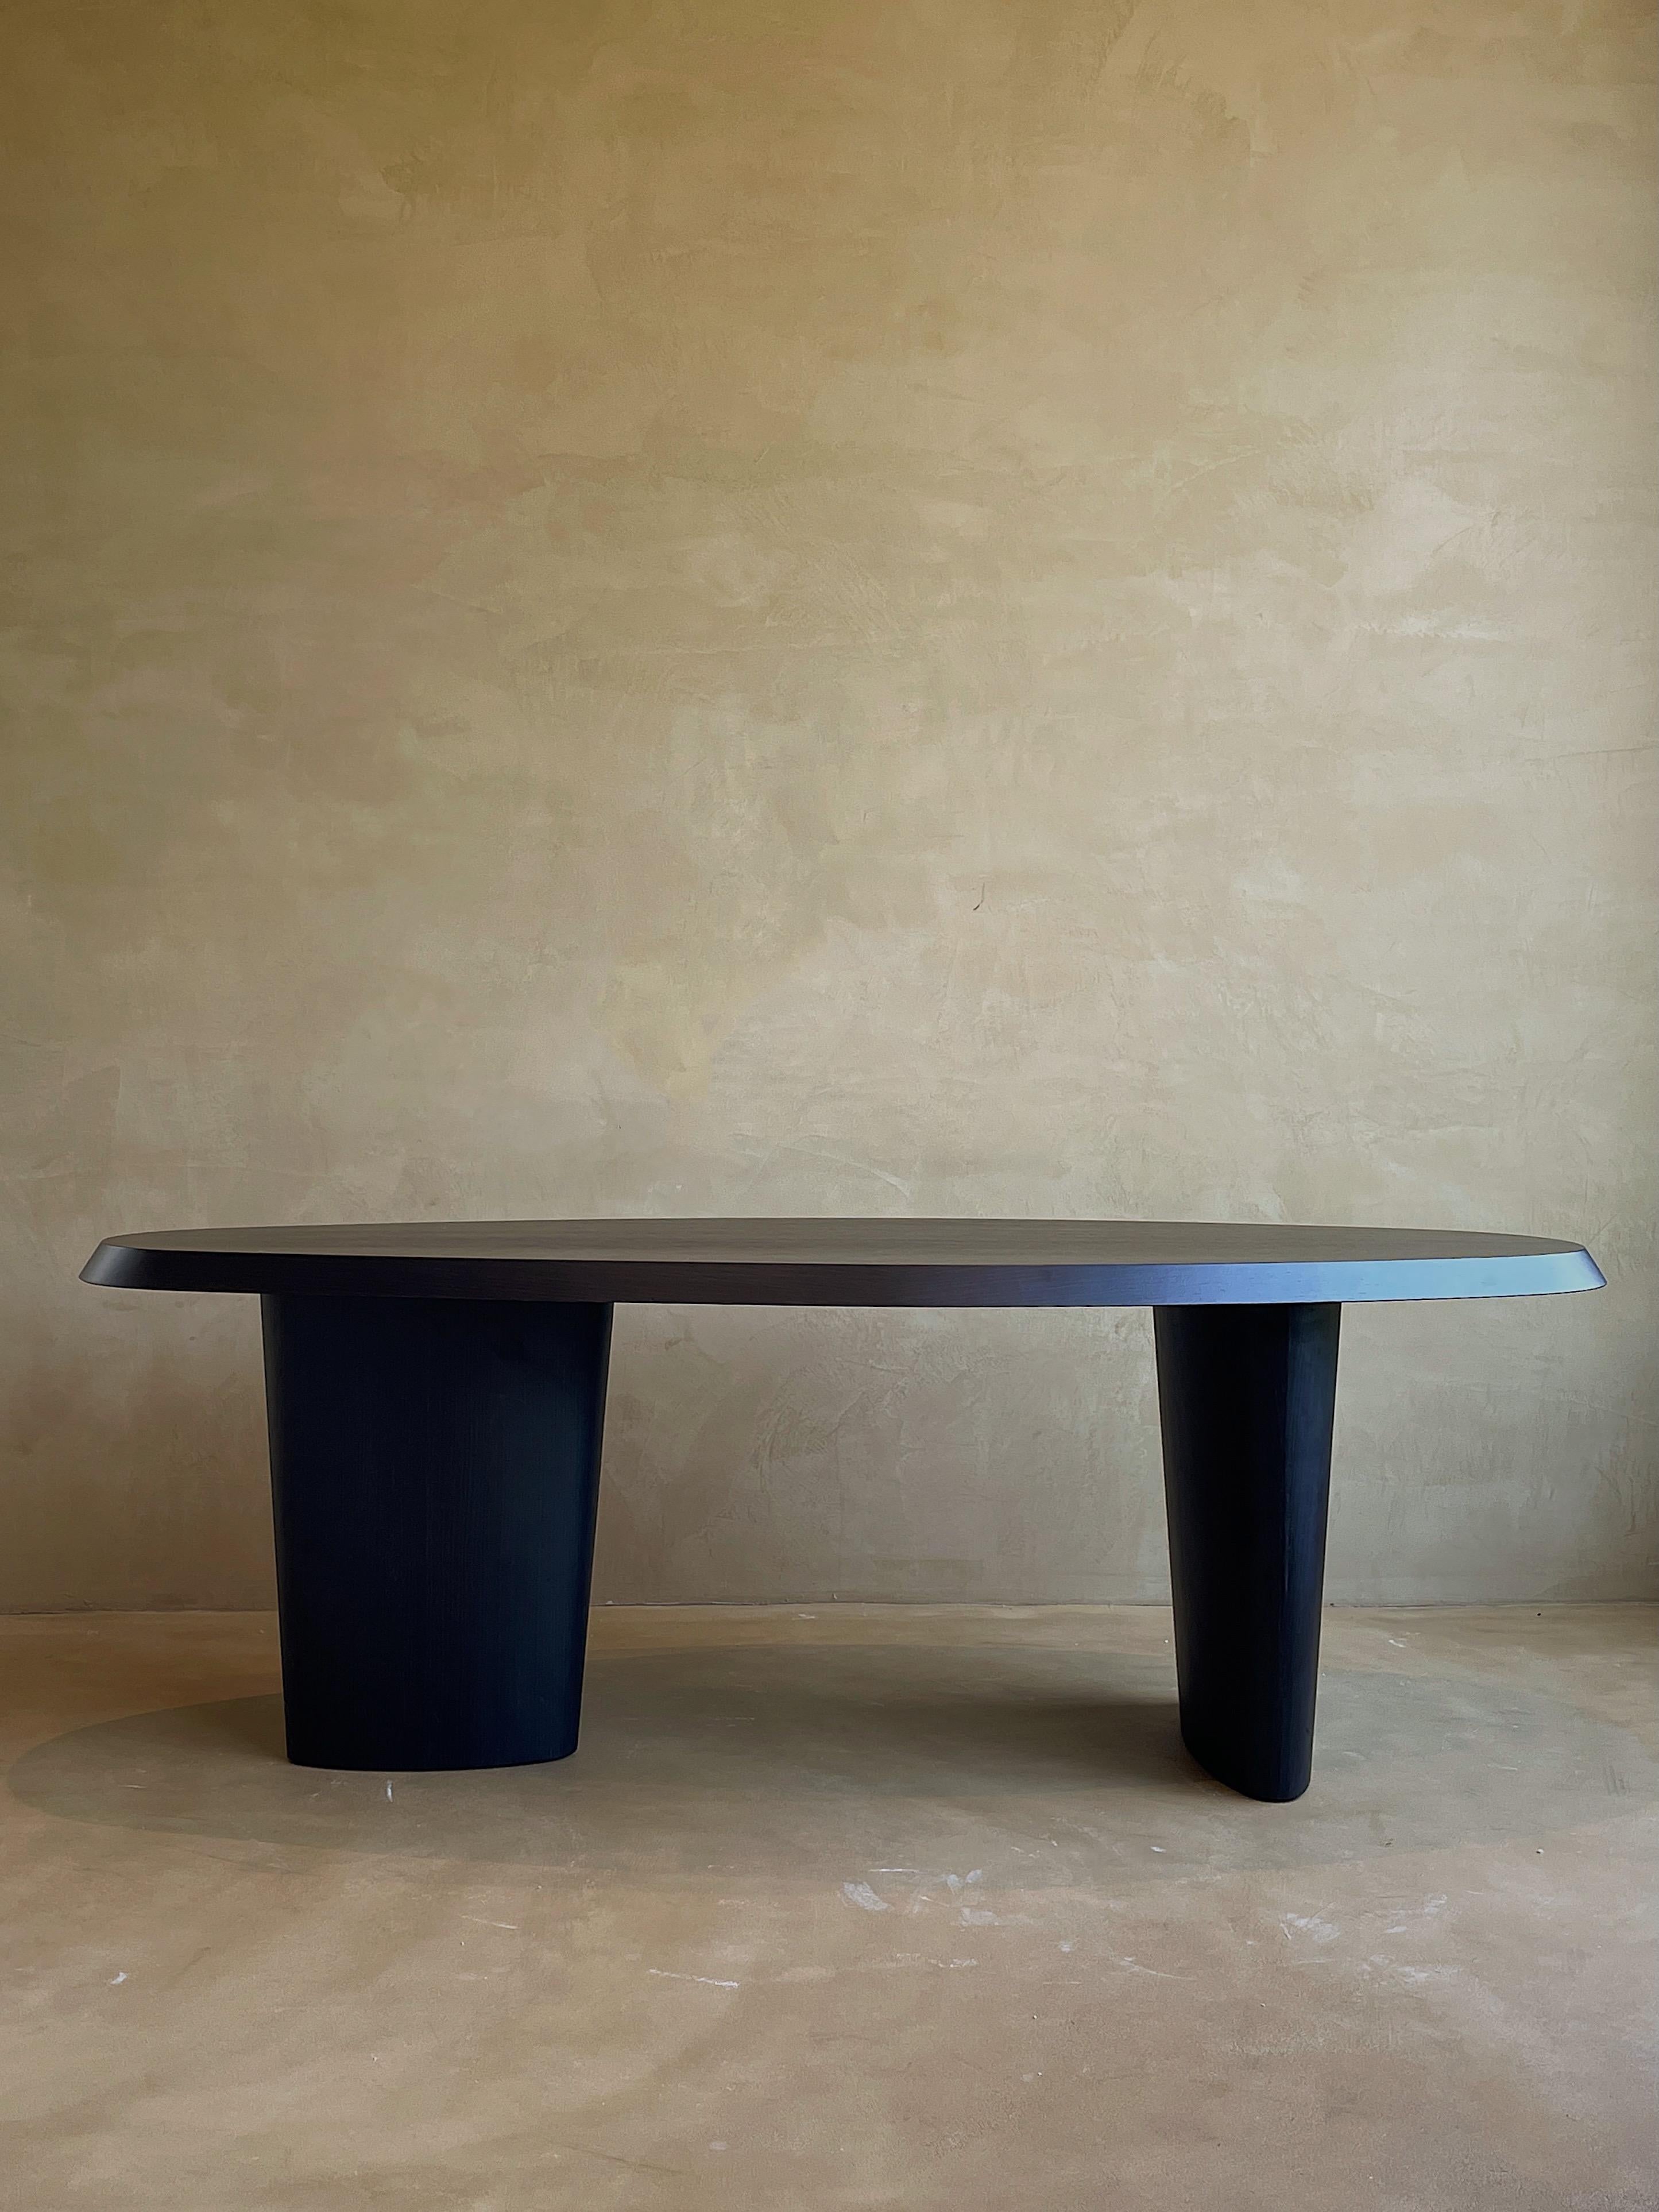 Oval dinning table by Karstudio
Dimensions: W 216 x D 96 x H 74 cm
Materials: MDF Frame


Kar, is the root of Sanskrit Karma, meaning karmic repetition. We seek the cause and effect in aesthetics, inspired from the past, the present, and the